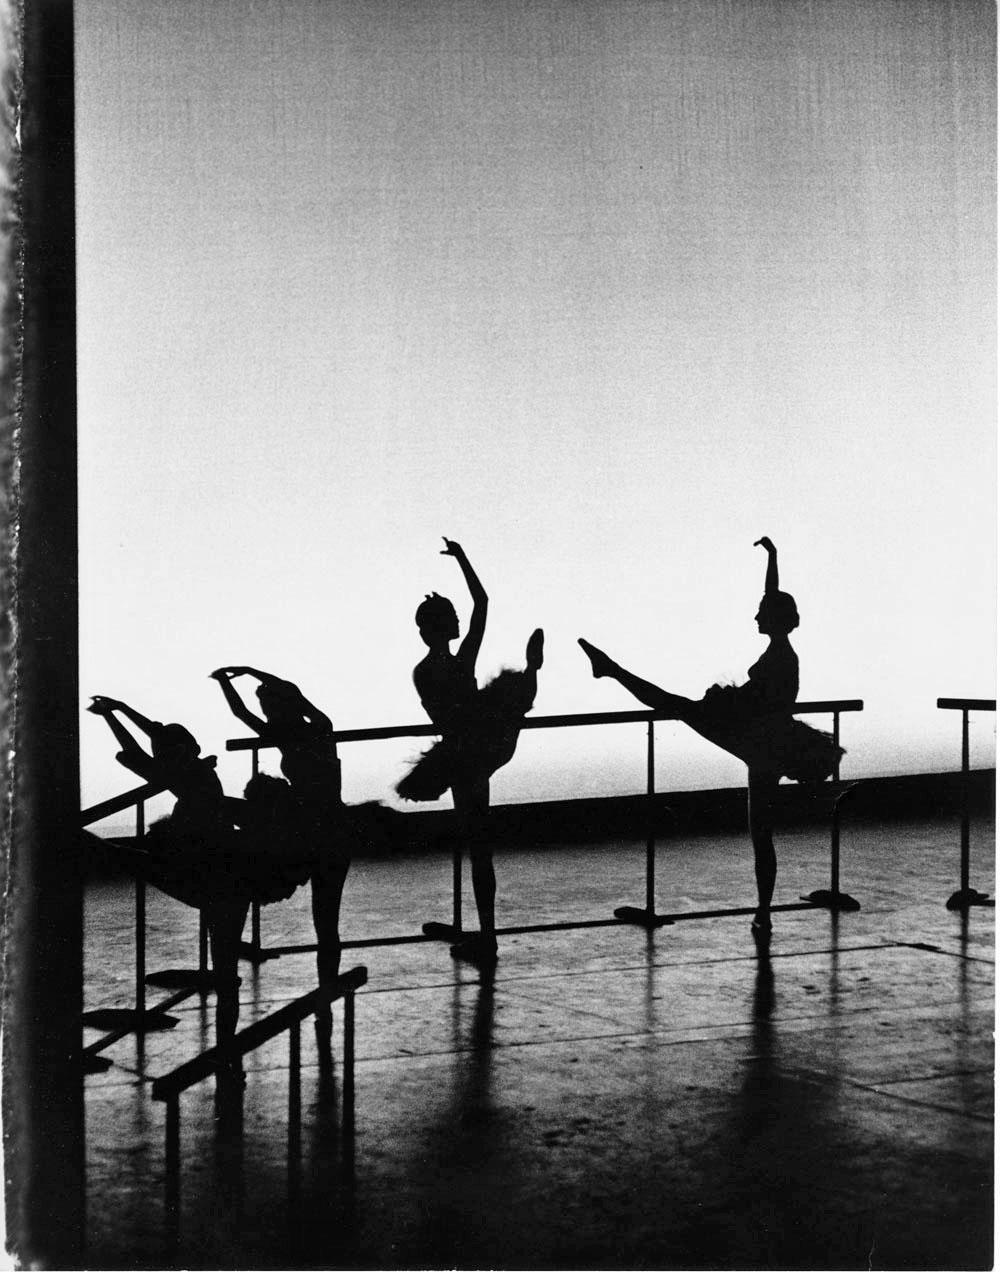 Jack Mitchell Black and White Photograph - American Ballet Theatre backstage rehearsal in silhouette